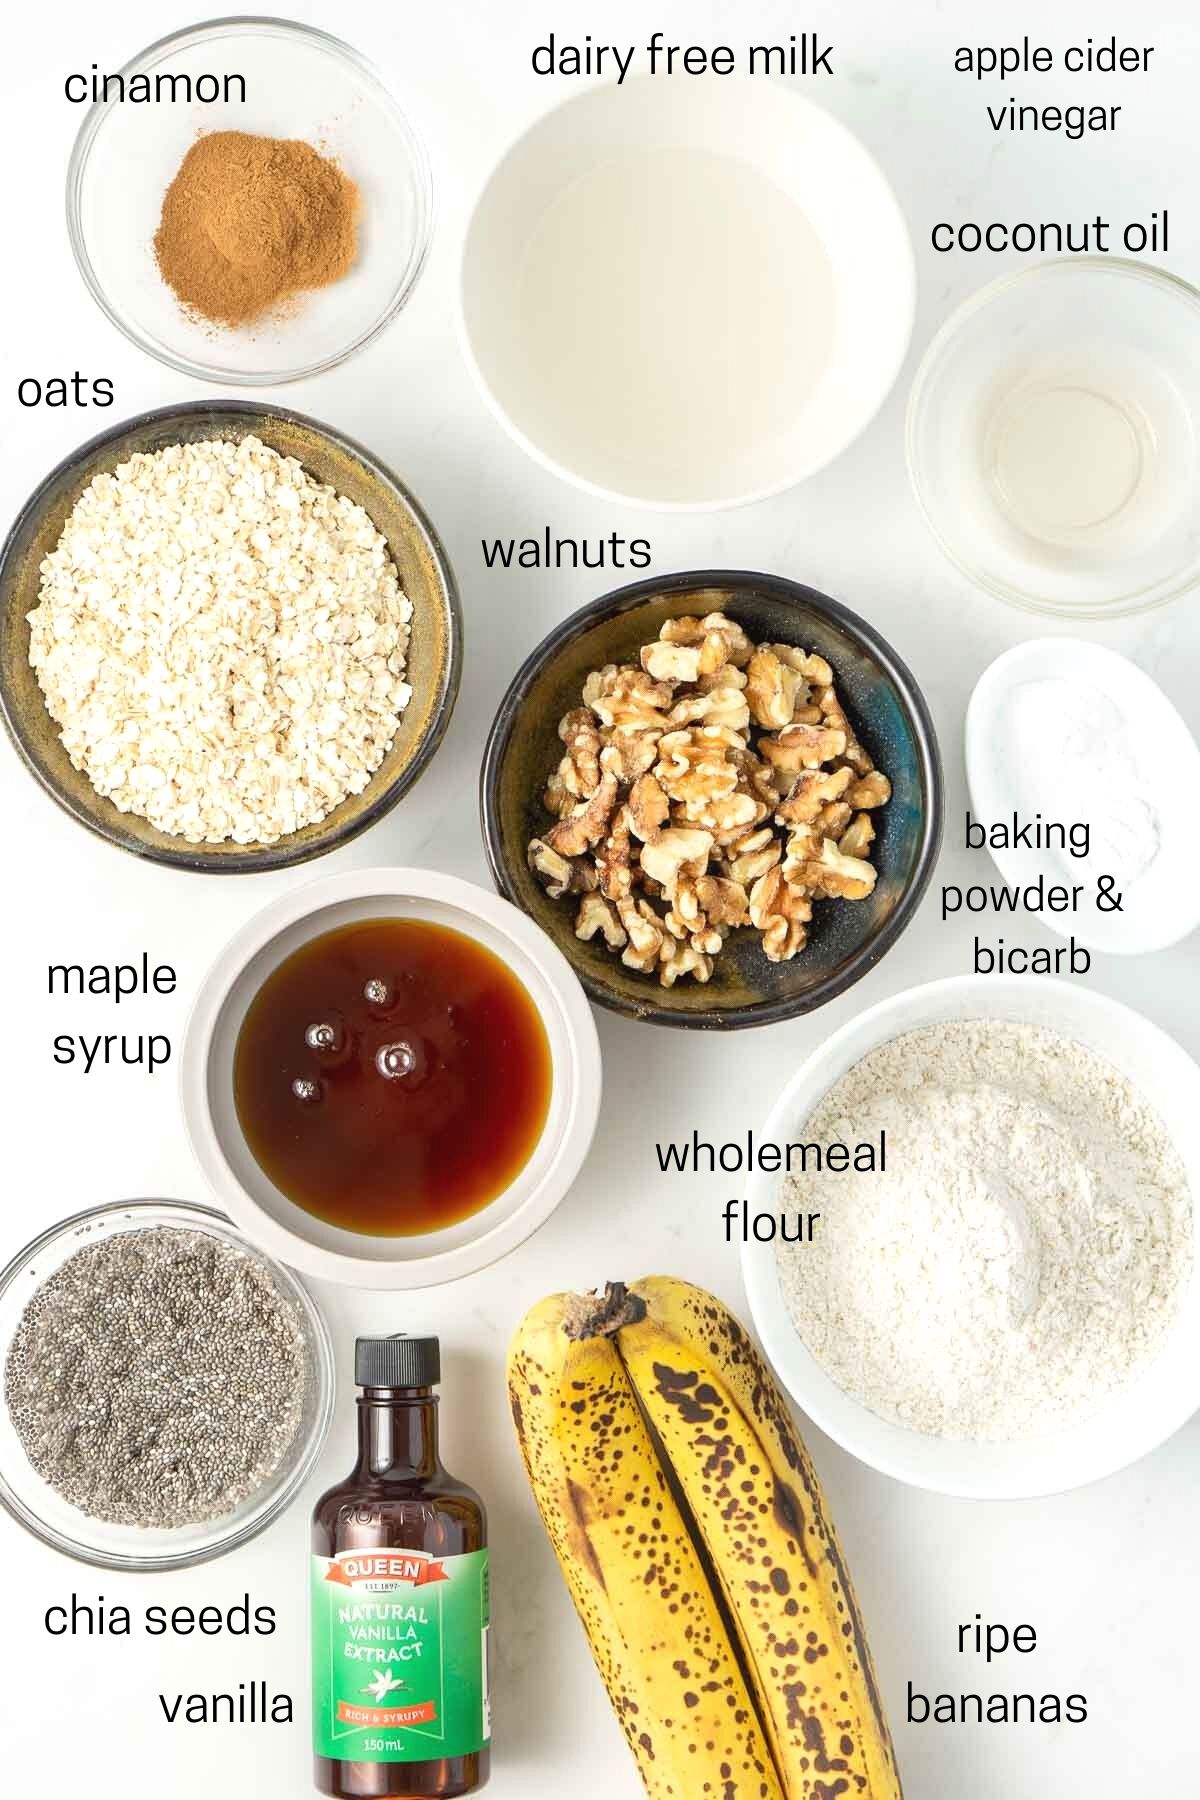 All ingredients needed to make the muffins laid out in small bowls.